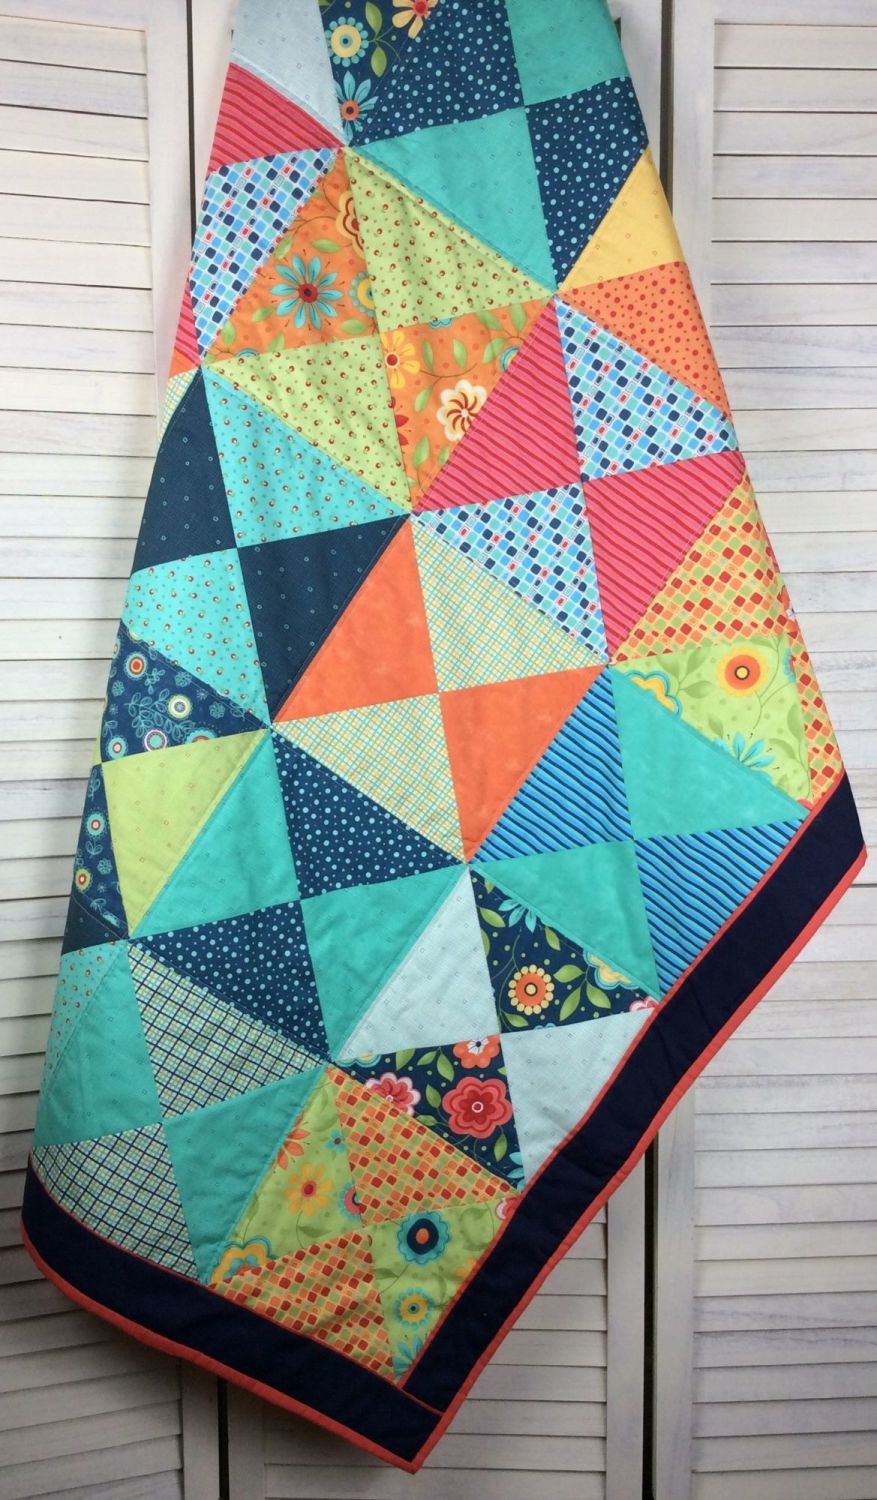 Child's Quilt - Moda - Block Party Layer Cake